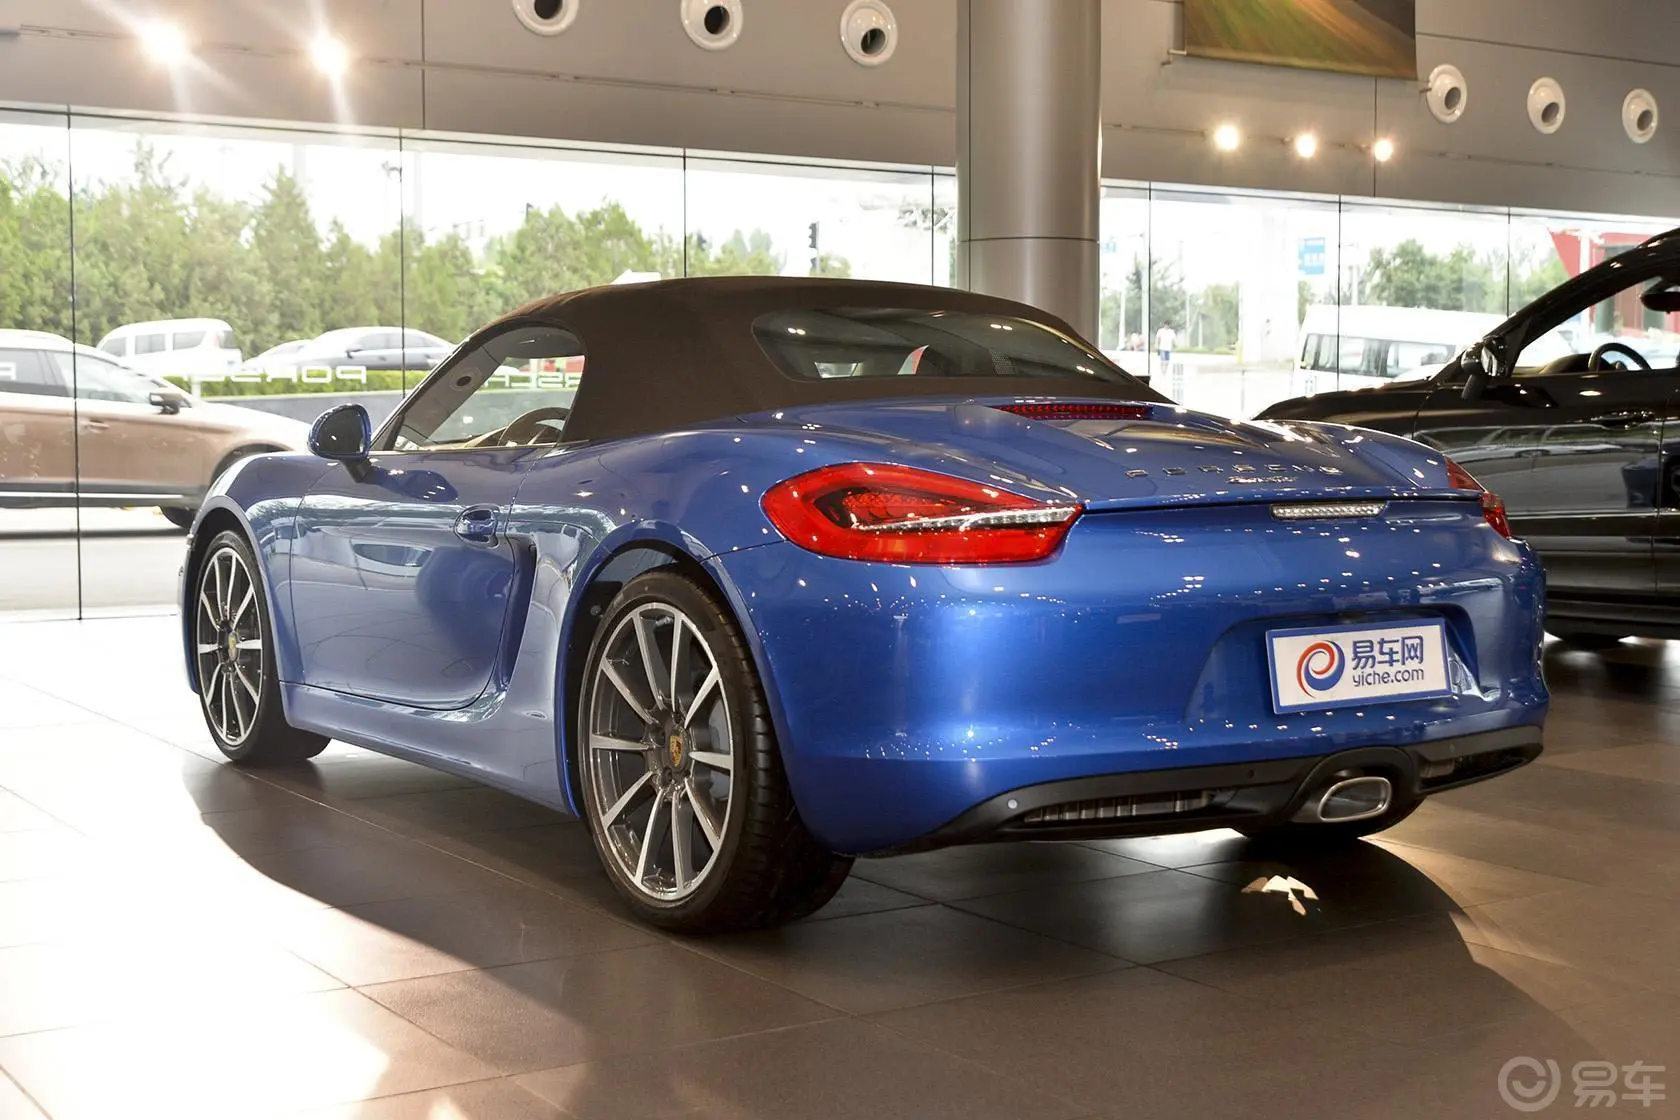 BoxsterBoxster 2.7 Style Edition侧后45度车头向左水平